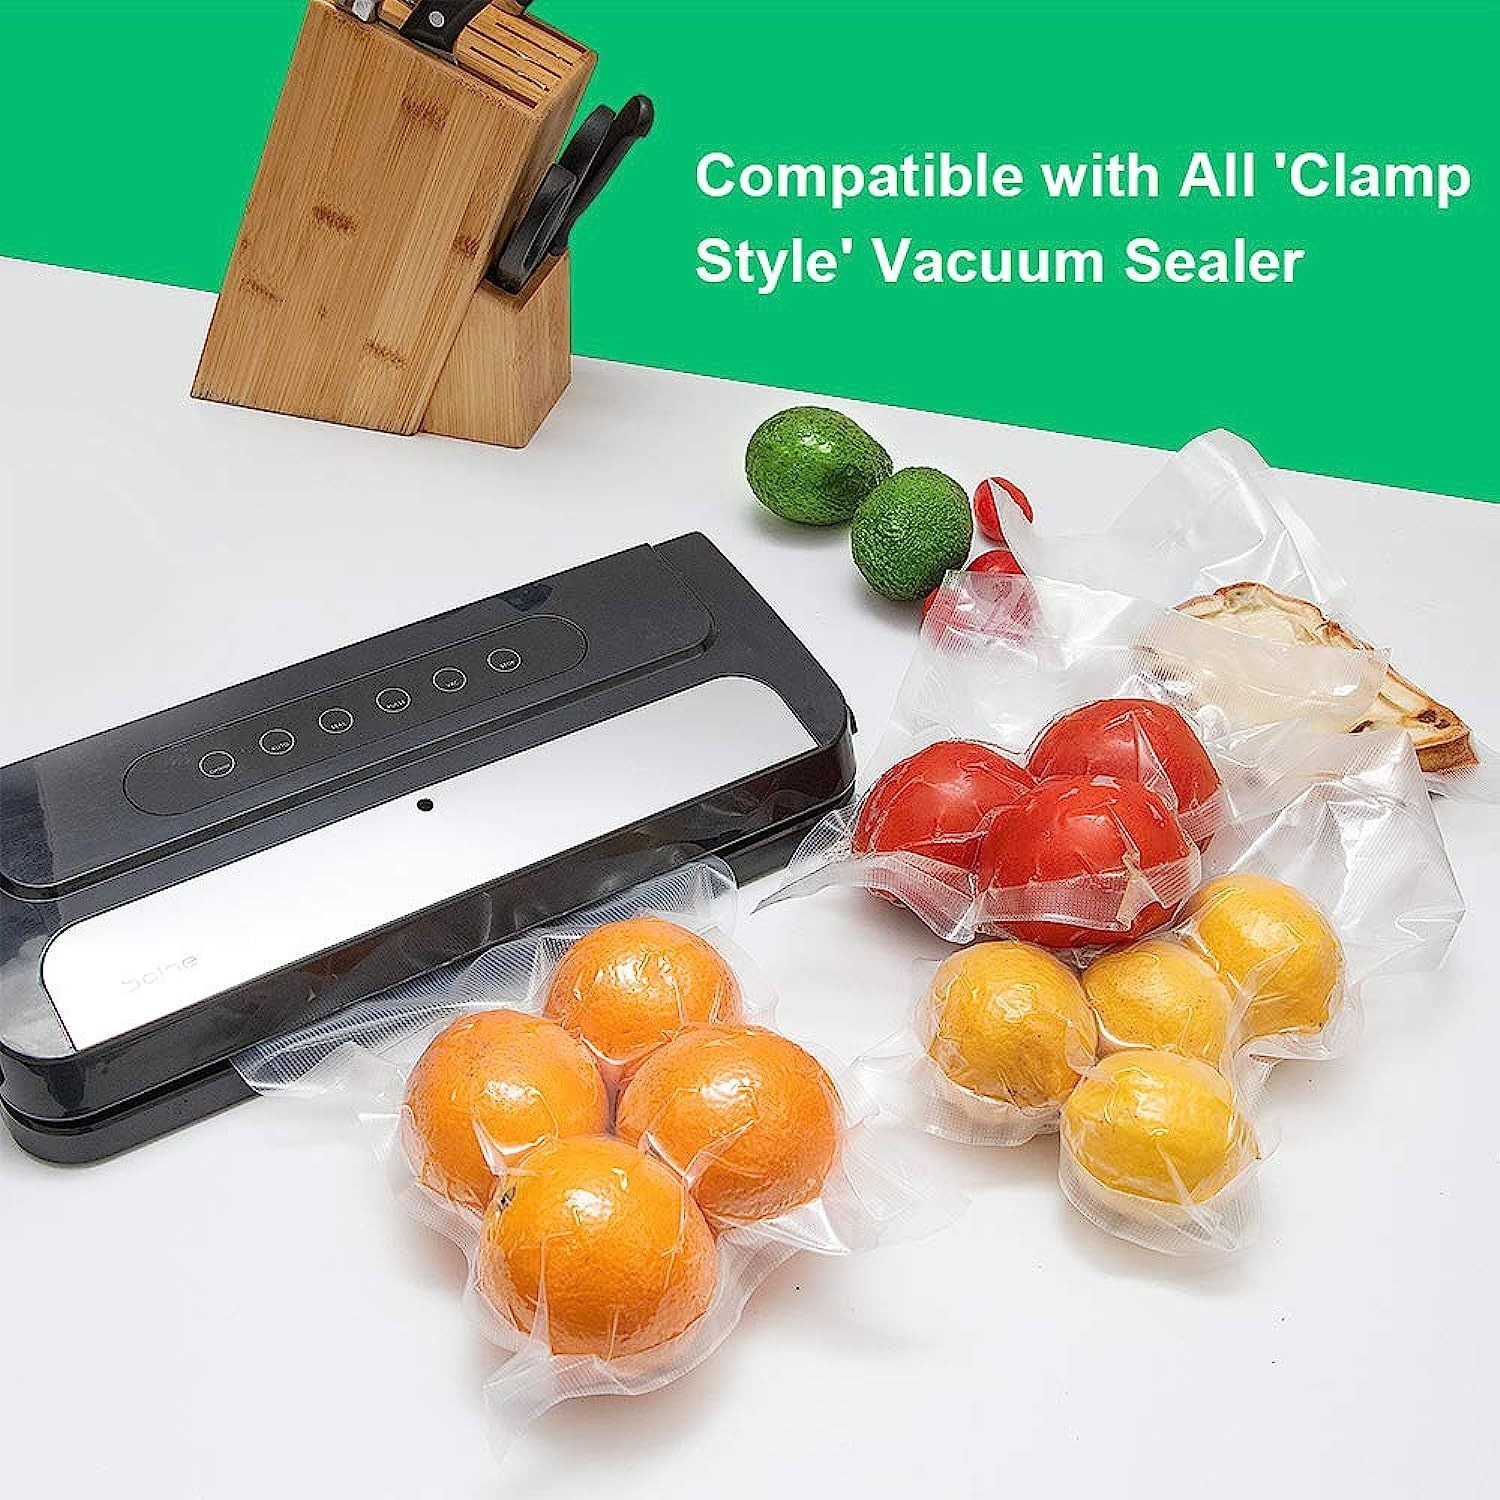 Sous Vide Bags Joule and Anova Cooker - 52 Pieces Kit with Vacuum Sealer  Bags